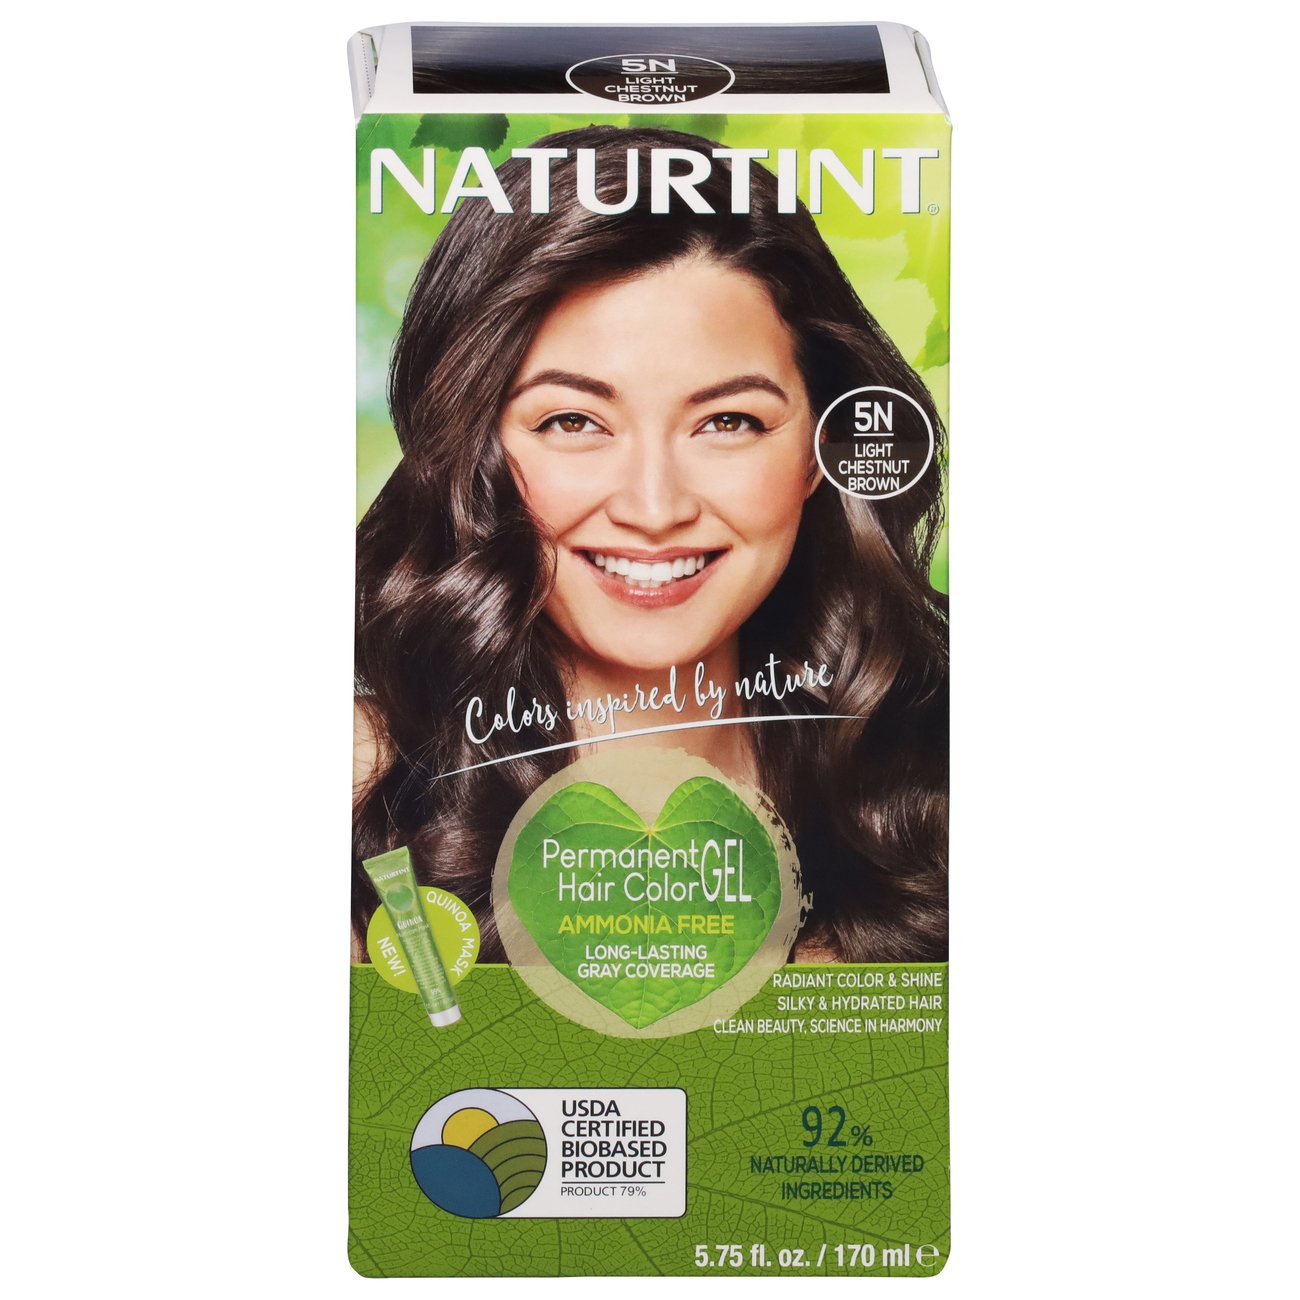 Naturtint Naturally Better Permanent Hair Color, Light Chestnut Brown 5N -  Shop Hair Care at H-E-B